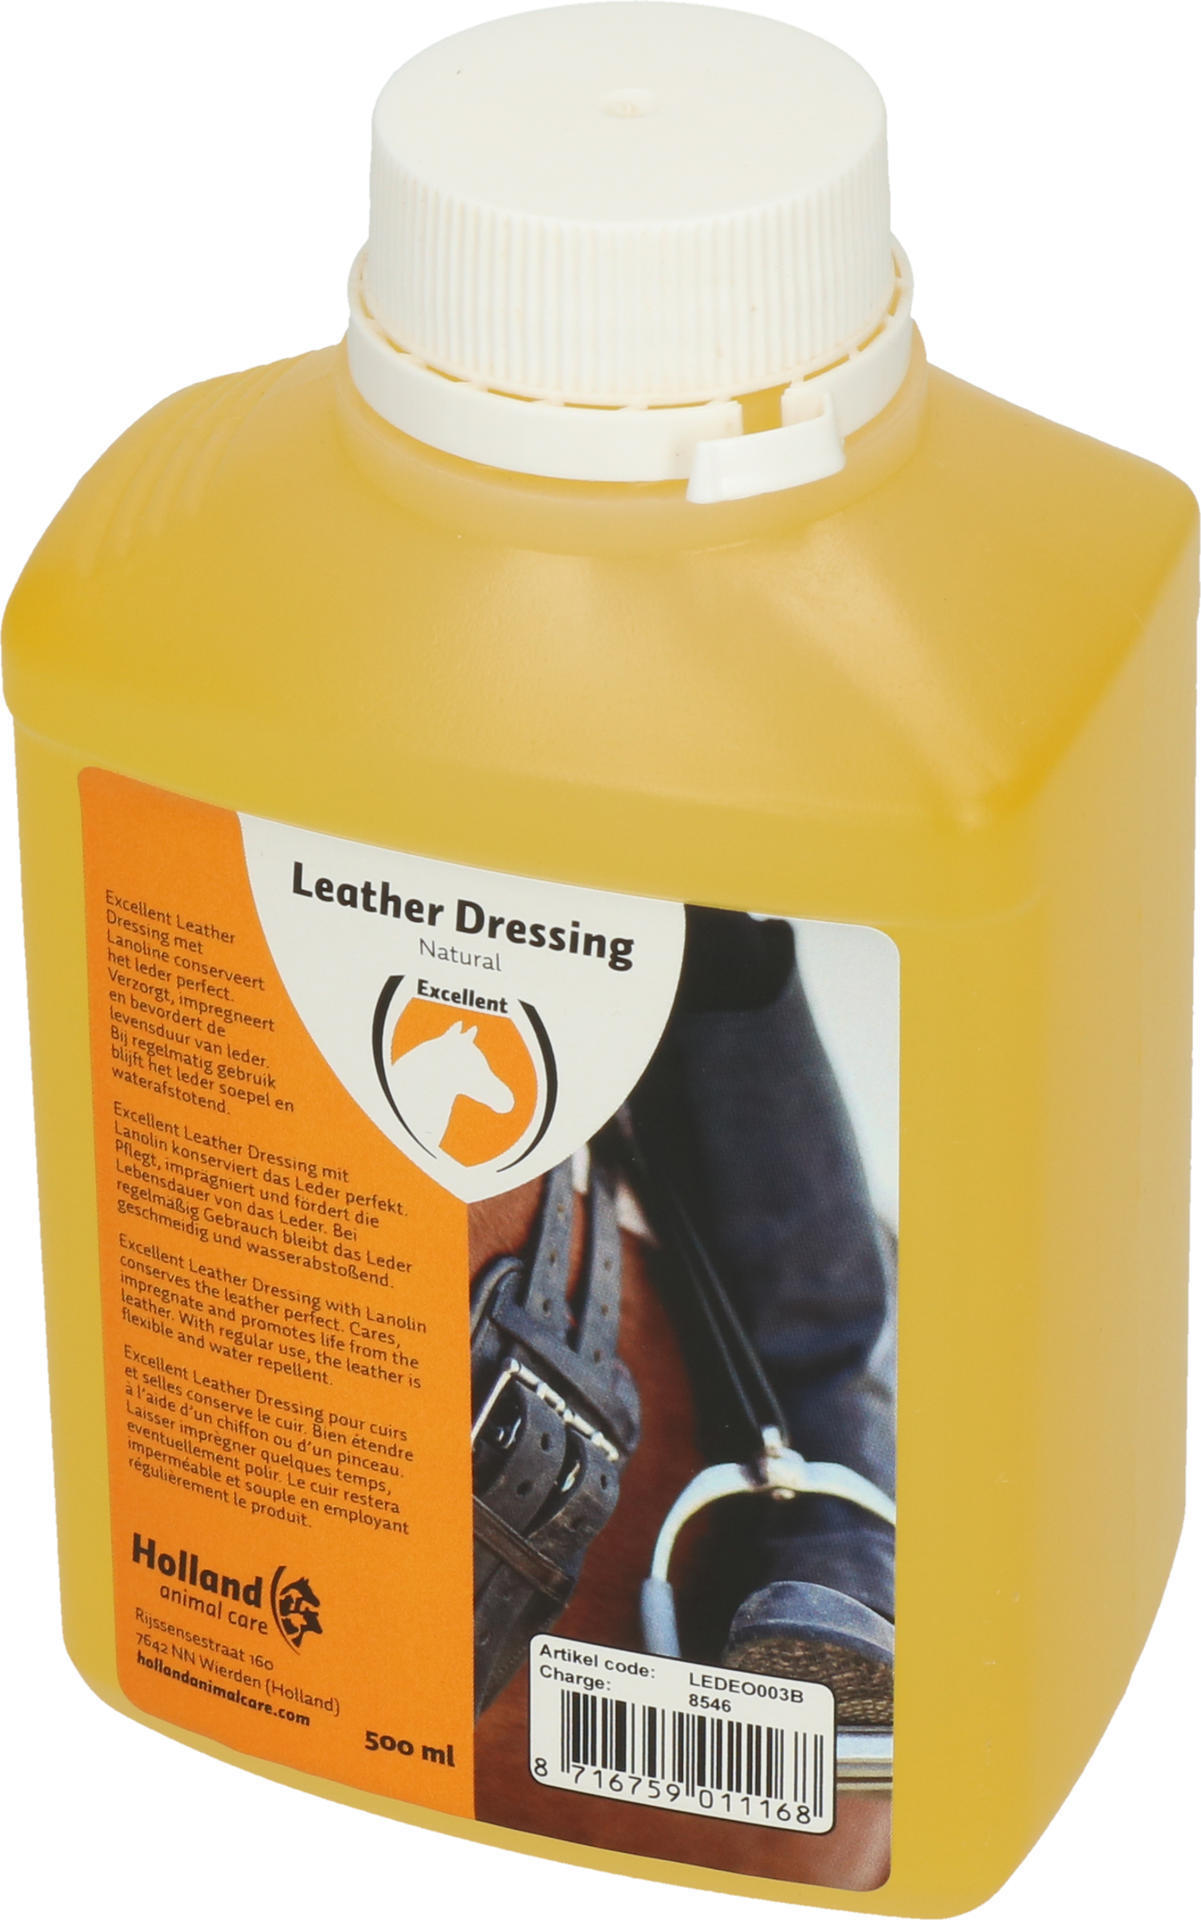 Natur leather and saddle oil 500 ml